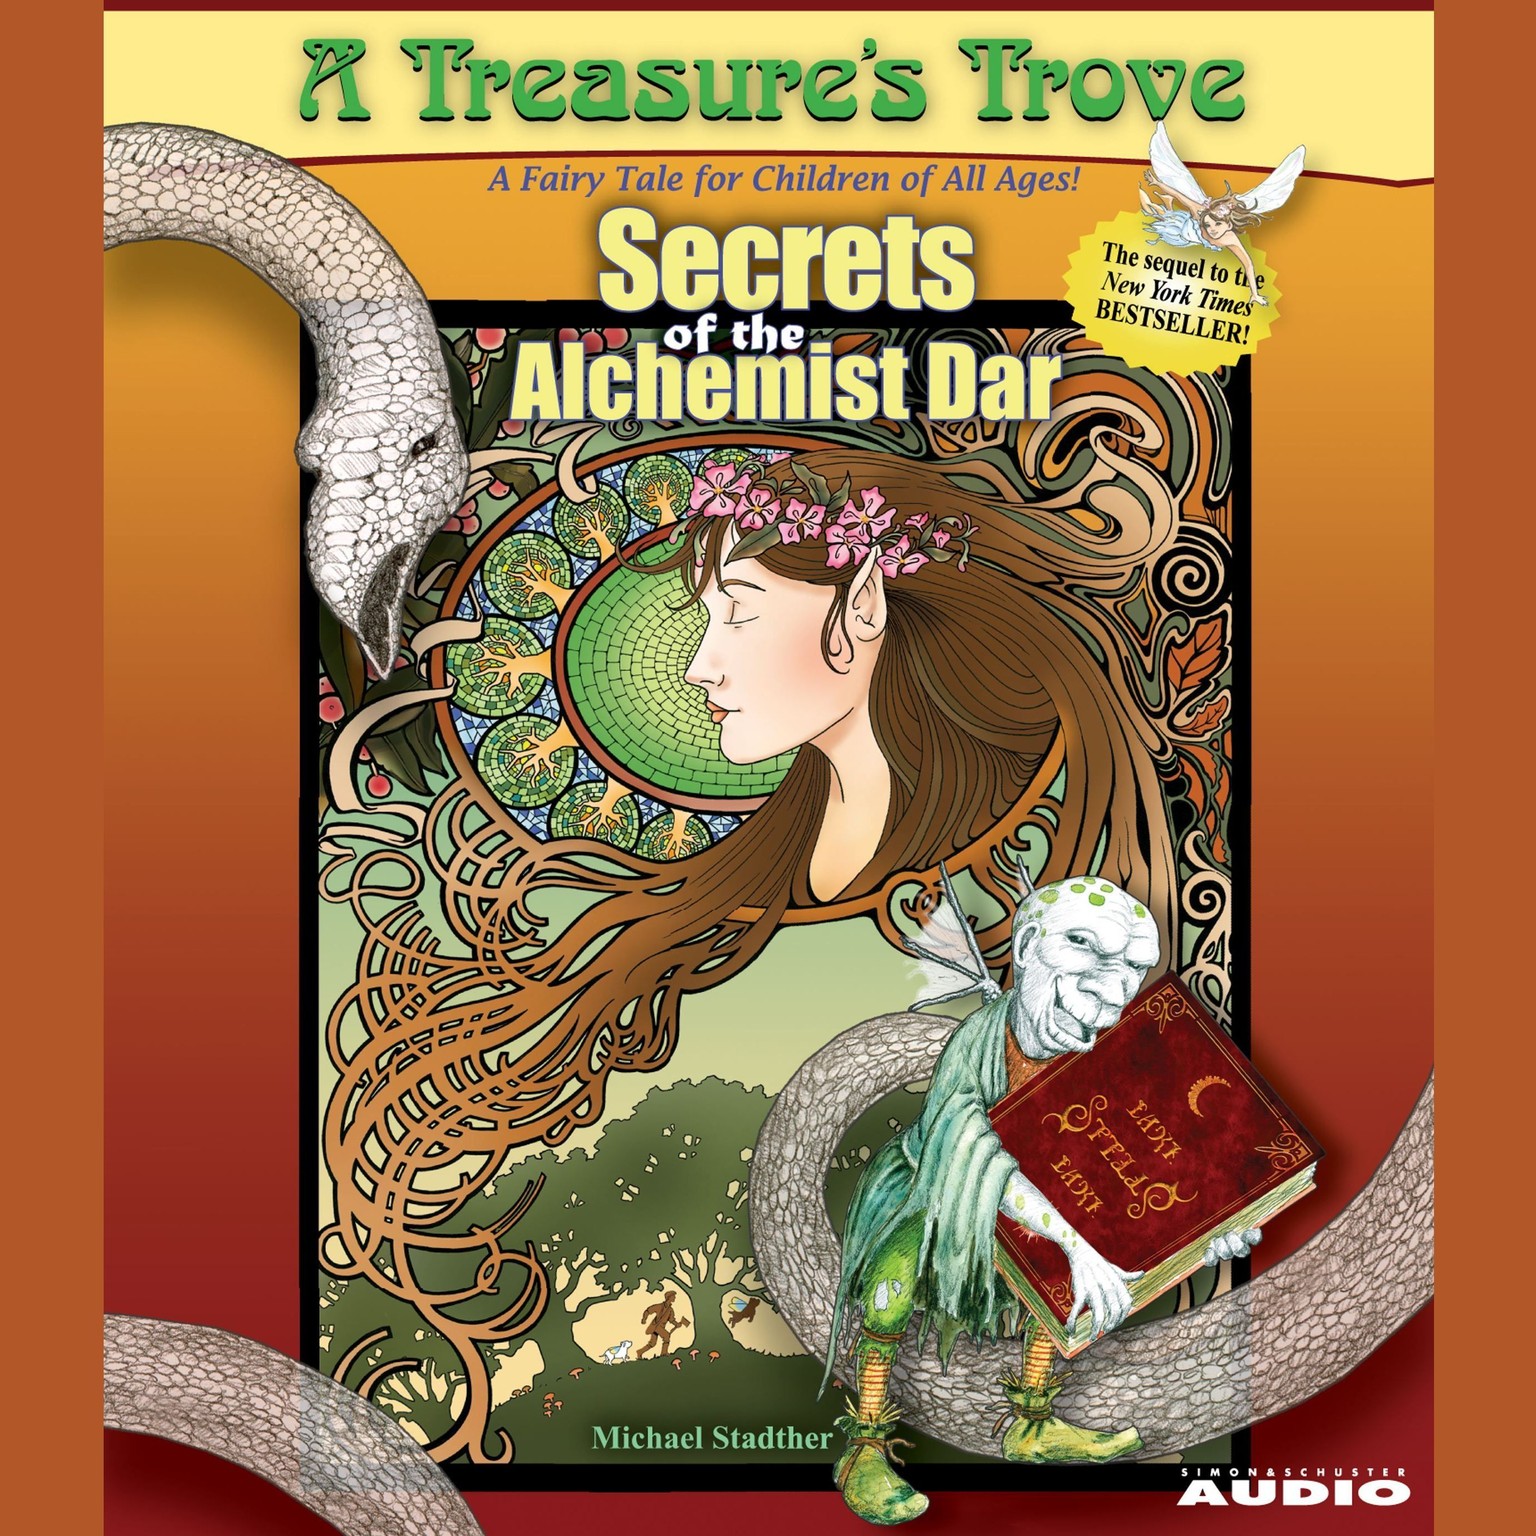 Secrets of the Alchemist Dar: A Treasures Trove Audiobook, by Michael Stadther